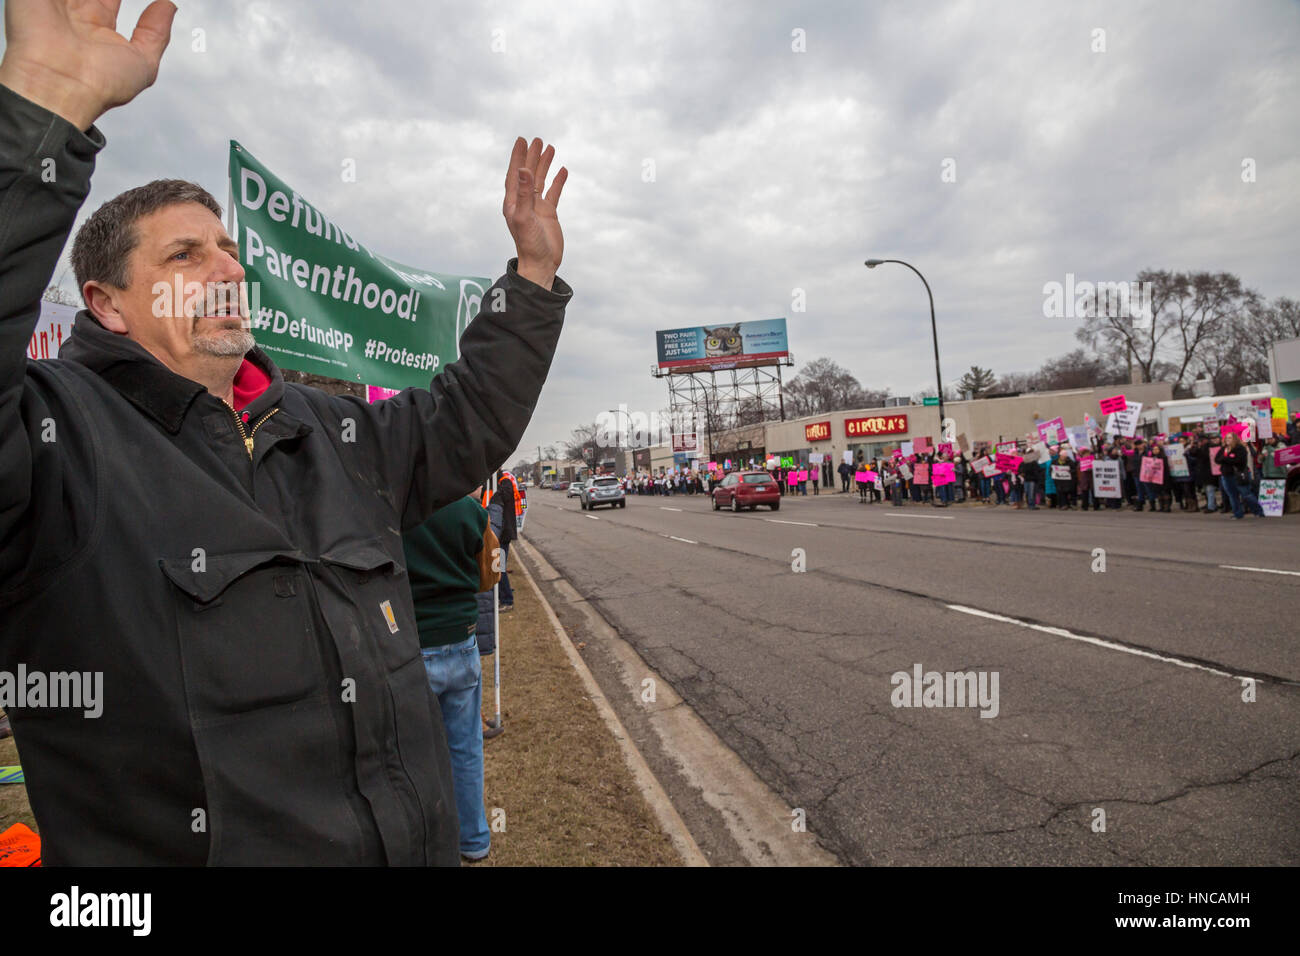 Ferndale, Michigan, USA. 11th February 2017. Supporters of Planned Parenthood (right side of street) far outnumbered opponents as both sides rallied outside Planned Parenthood clinics in metro Detroit. The Trump administration says it will deny federal funds to Planned Parenthood for women's health services because the agency helps some women obtain legal abortions. Credit: Jim West/Alamy Live News Stock Photo